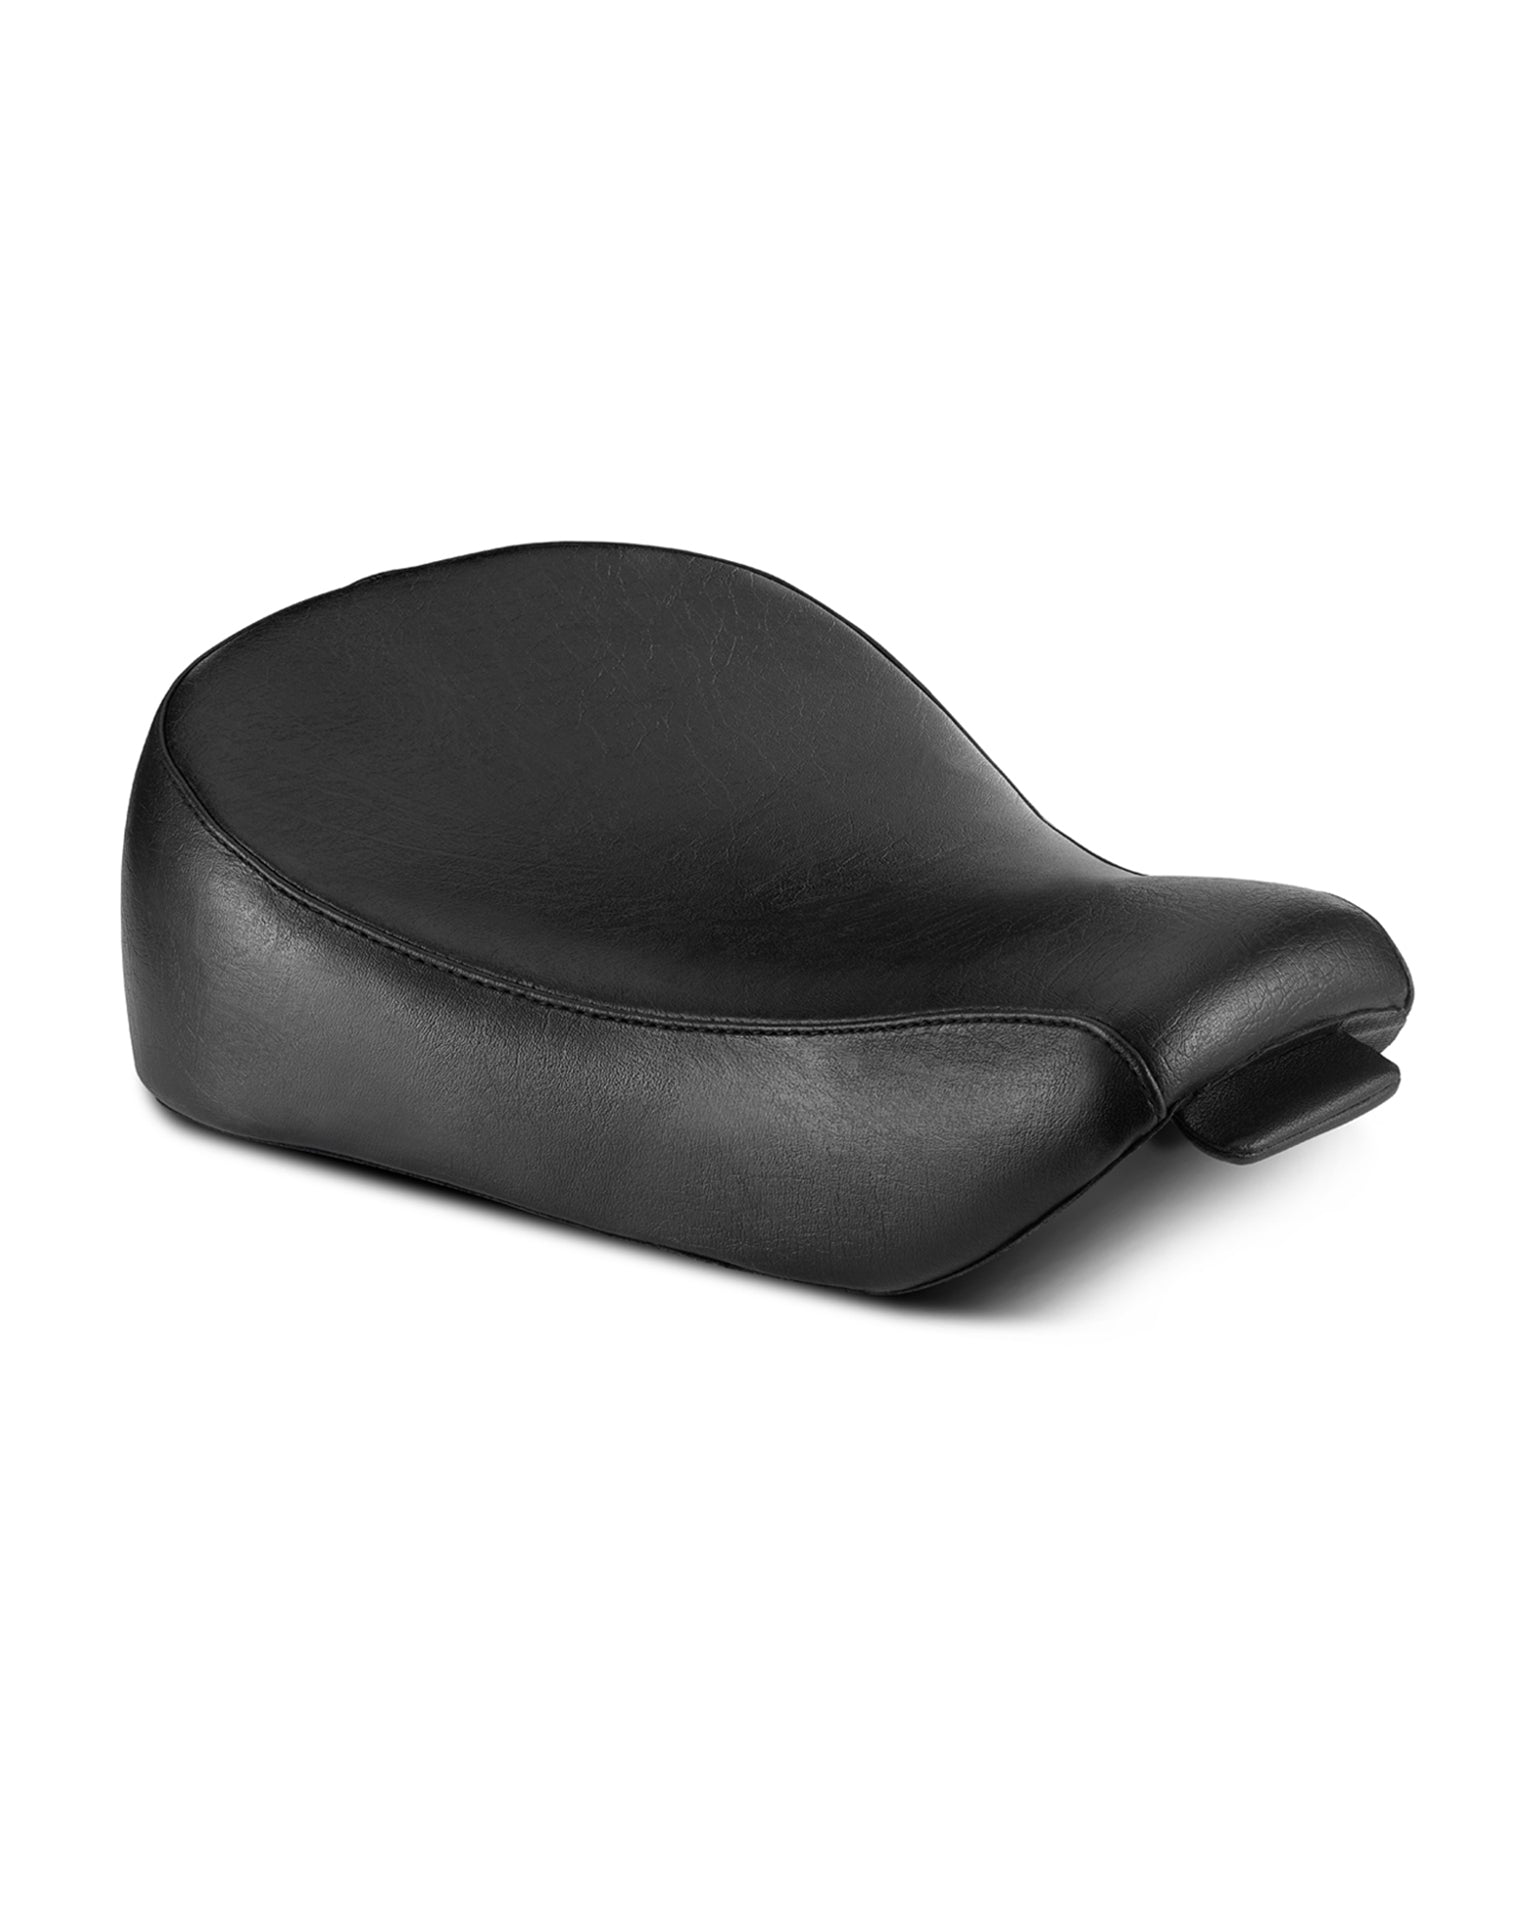 Iron Born Plain Design Motorcycle Solo Seat for Sportster Seventy Two Main view